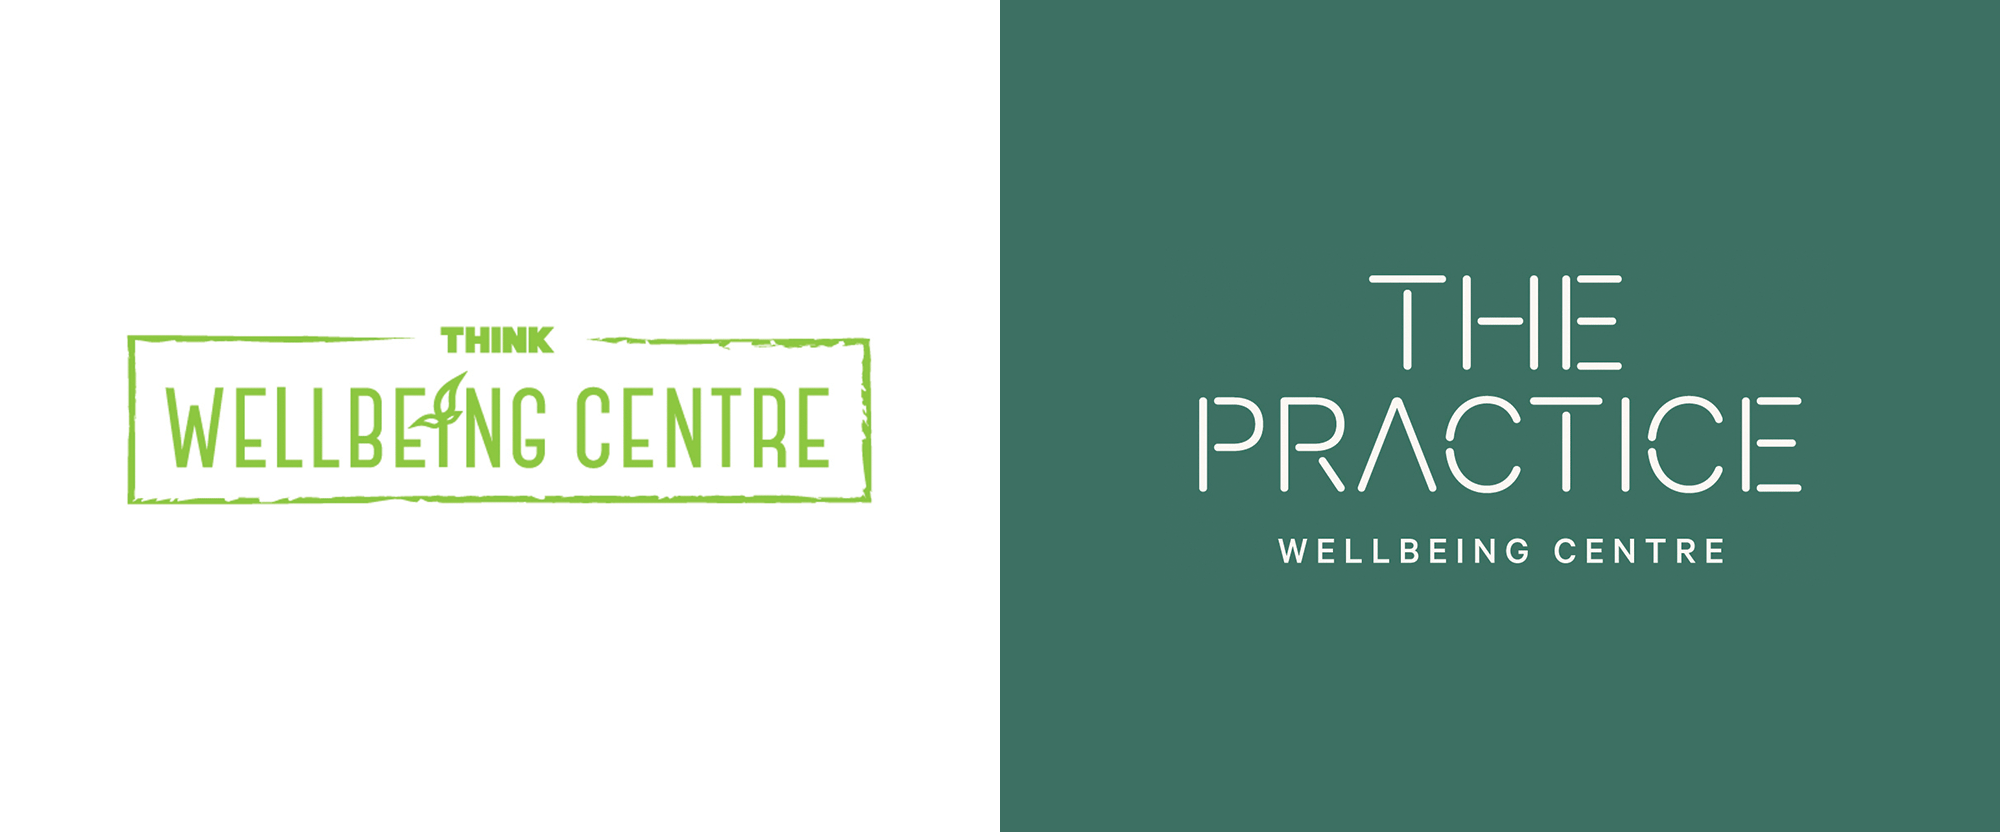 New Name, Logo, and Identity for The Practice by SomeOne